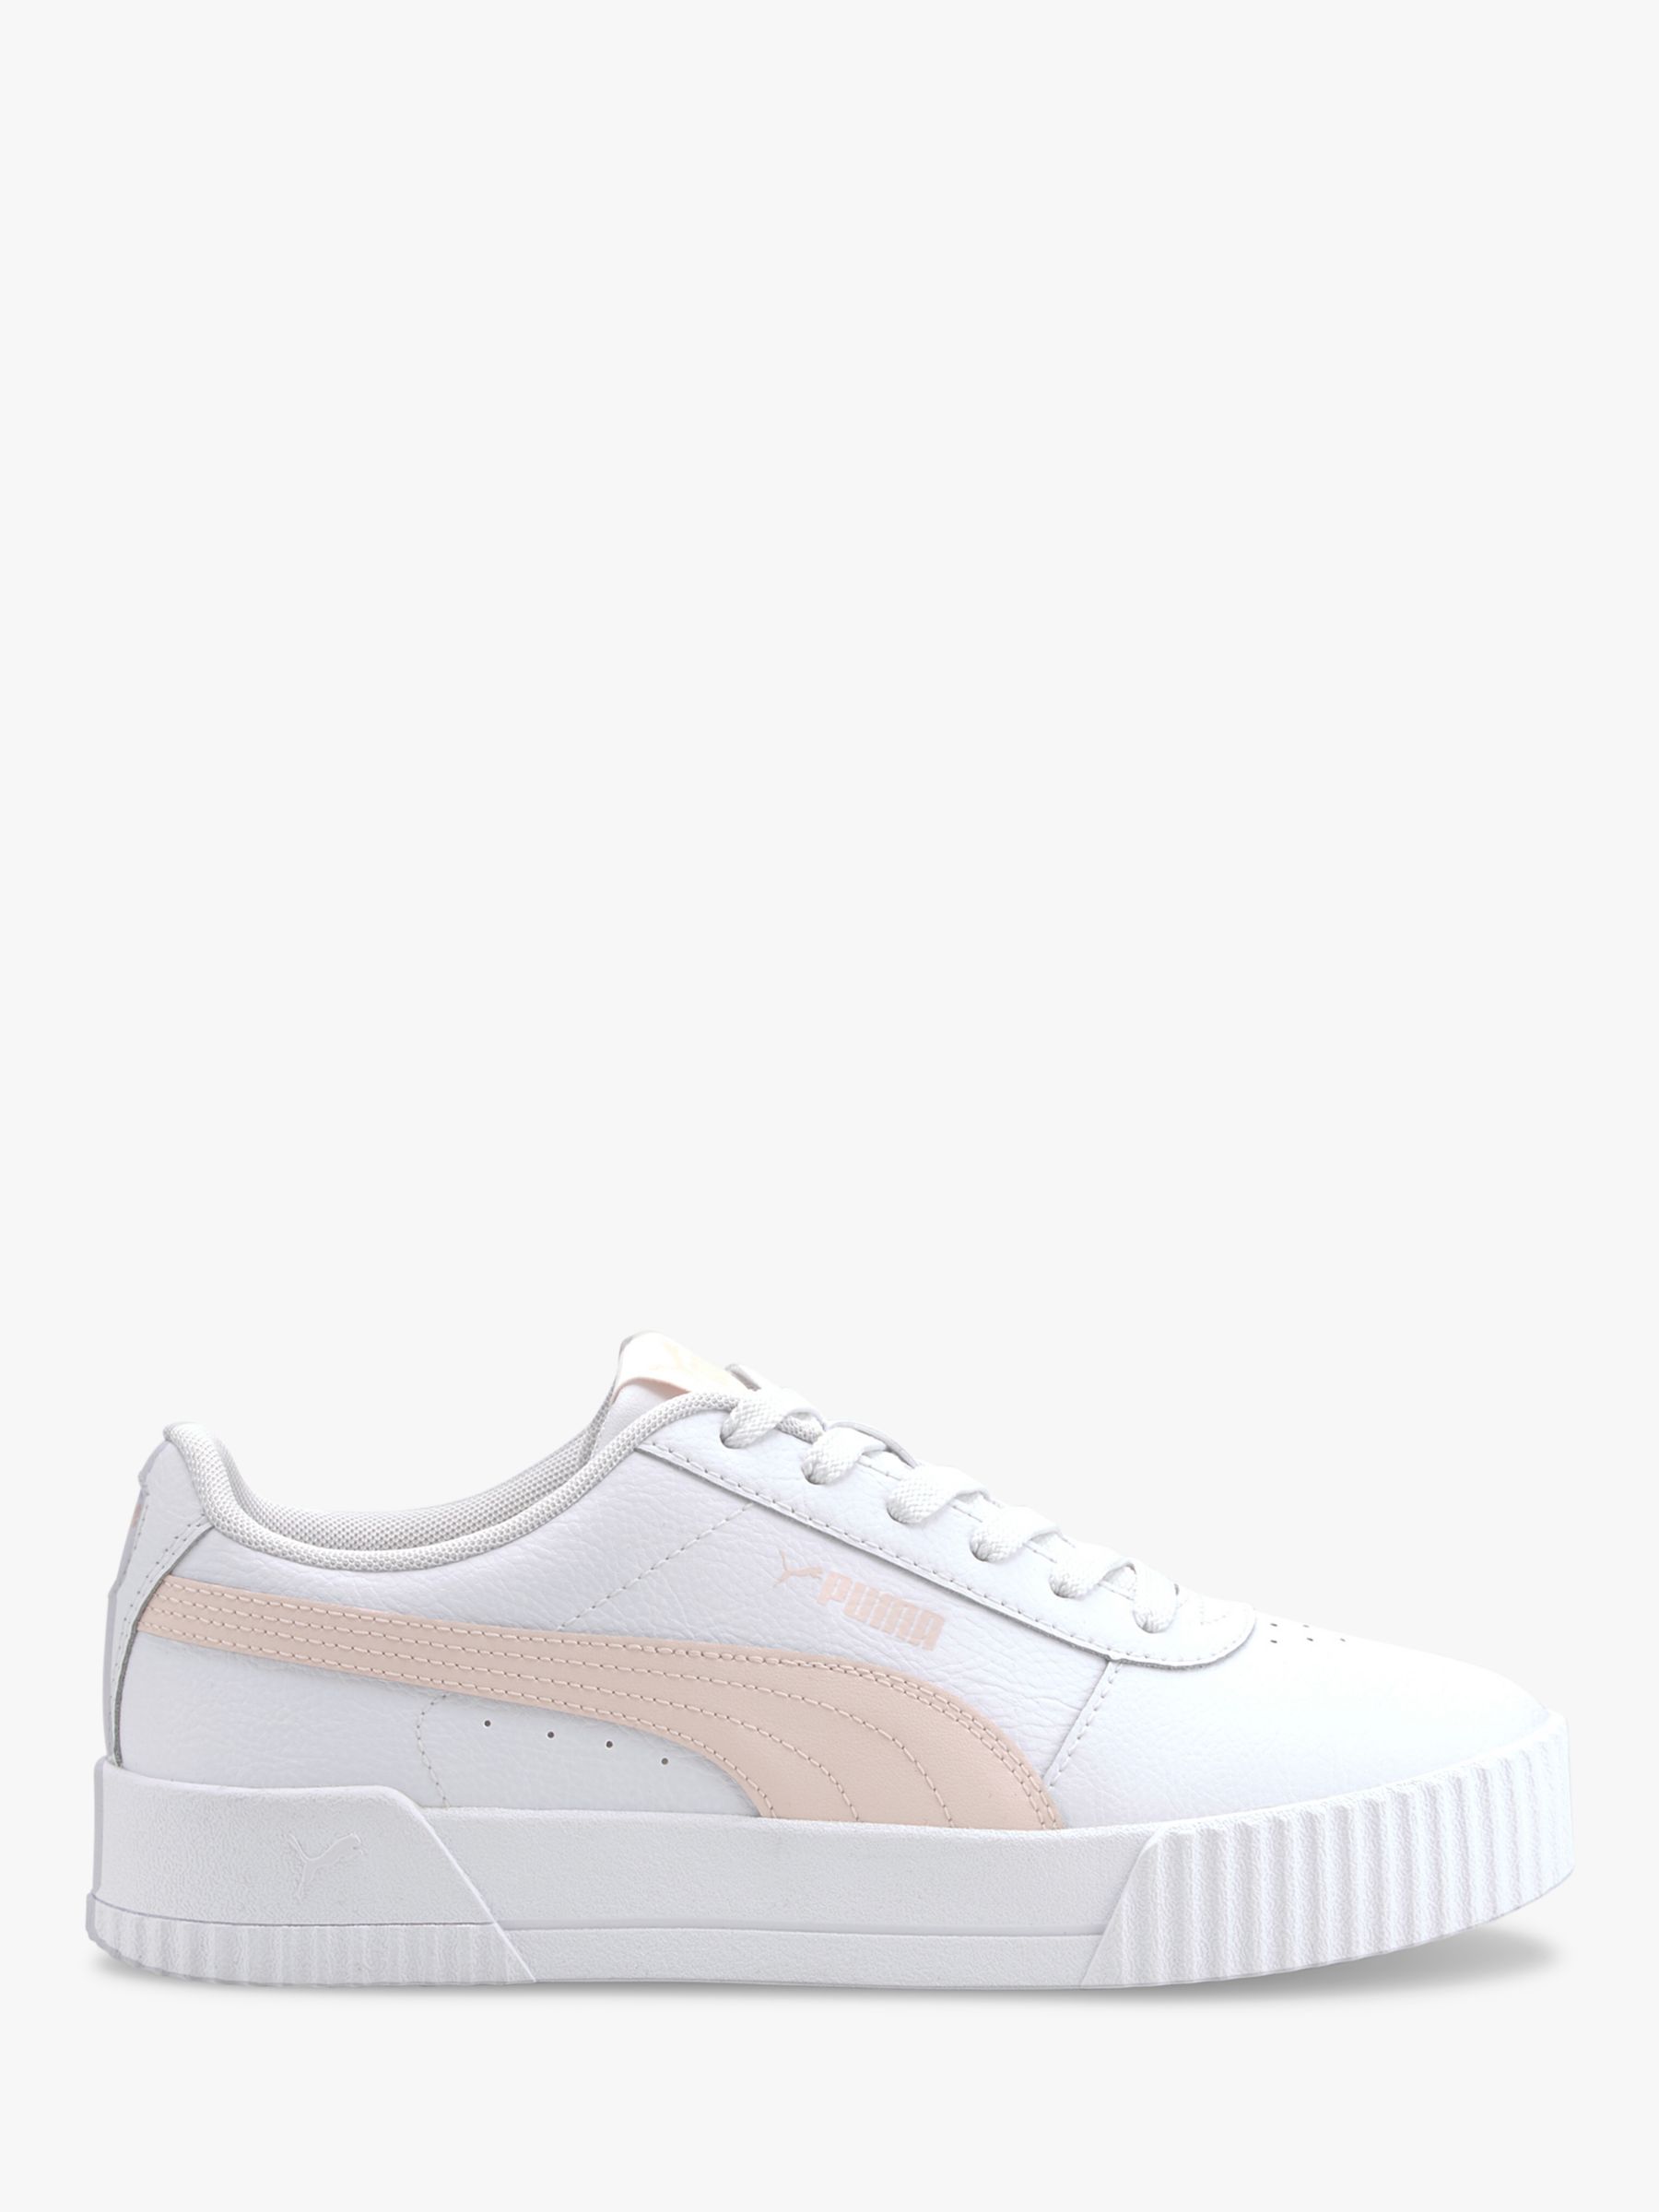 PUMA Carina Leather Women's Trainers, White/Pale Pink, 4